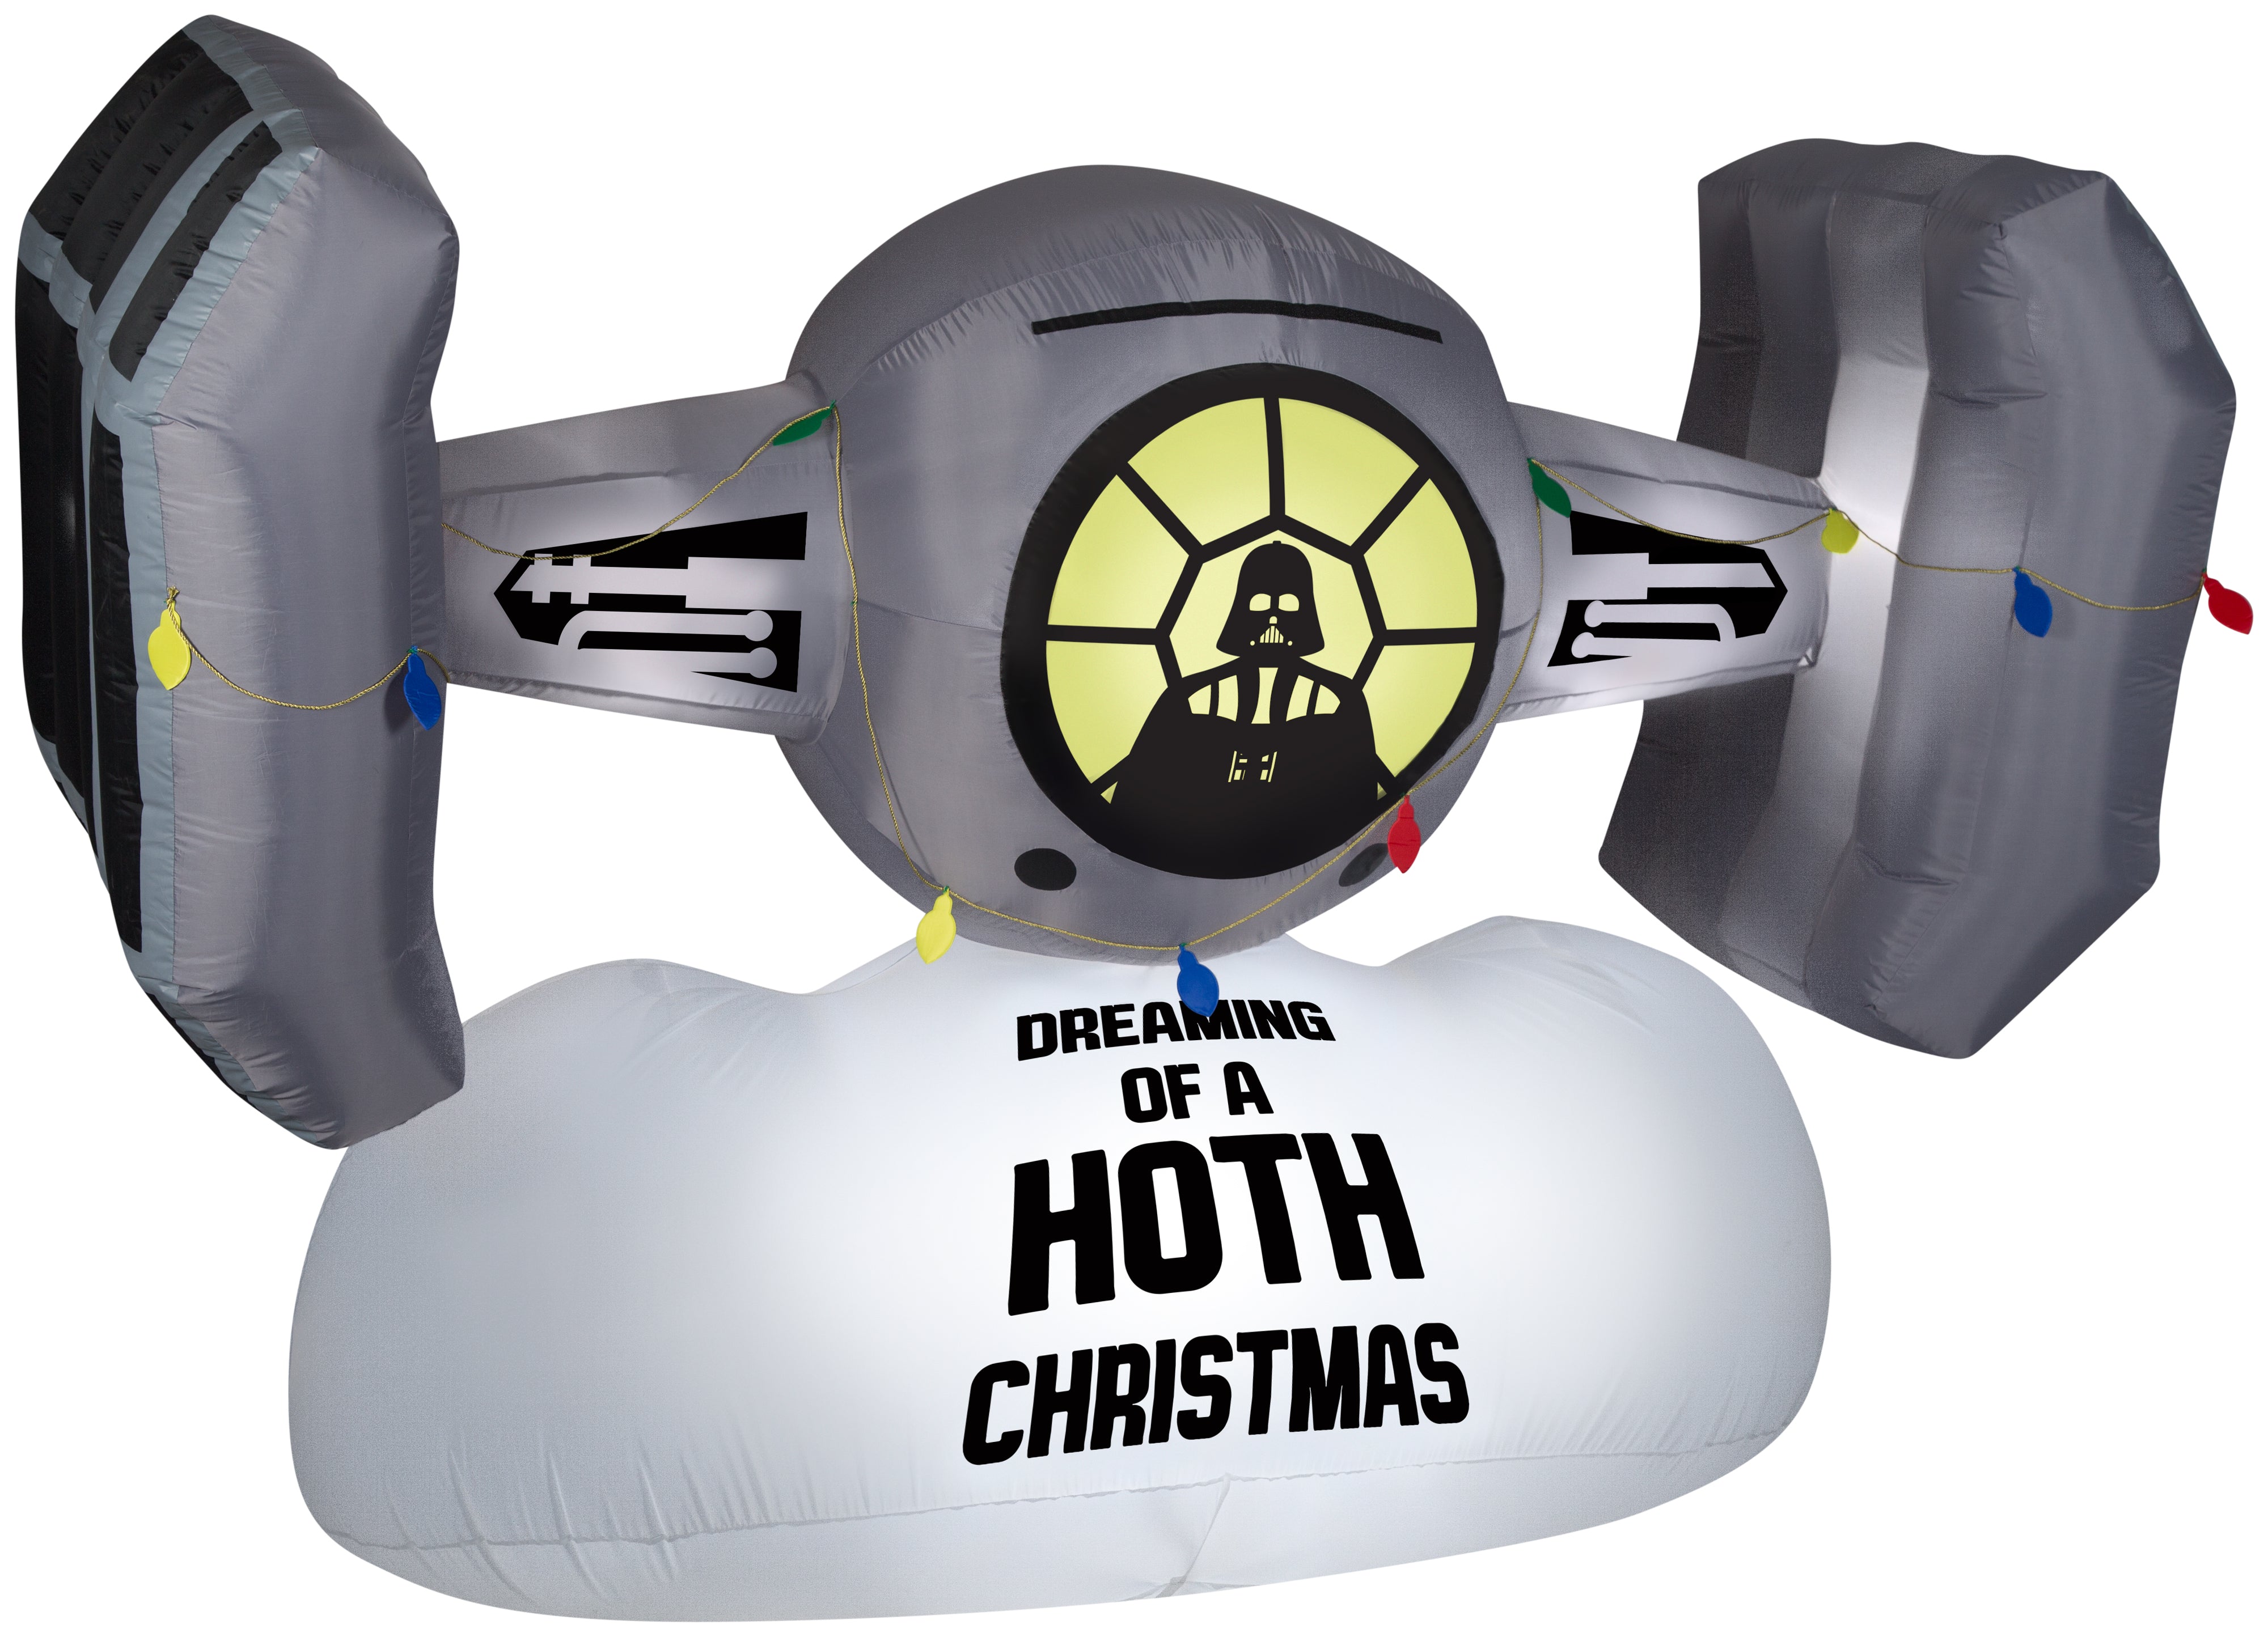 Gemmy Christmas Airblown Inflatable TIE Fighter w/Darth Vader, 6 ft Tall, Gray